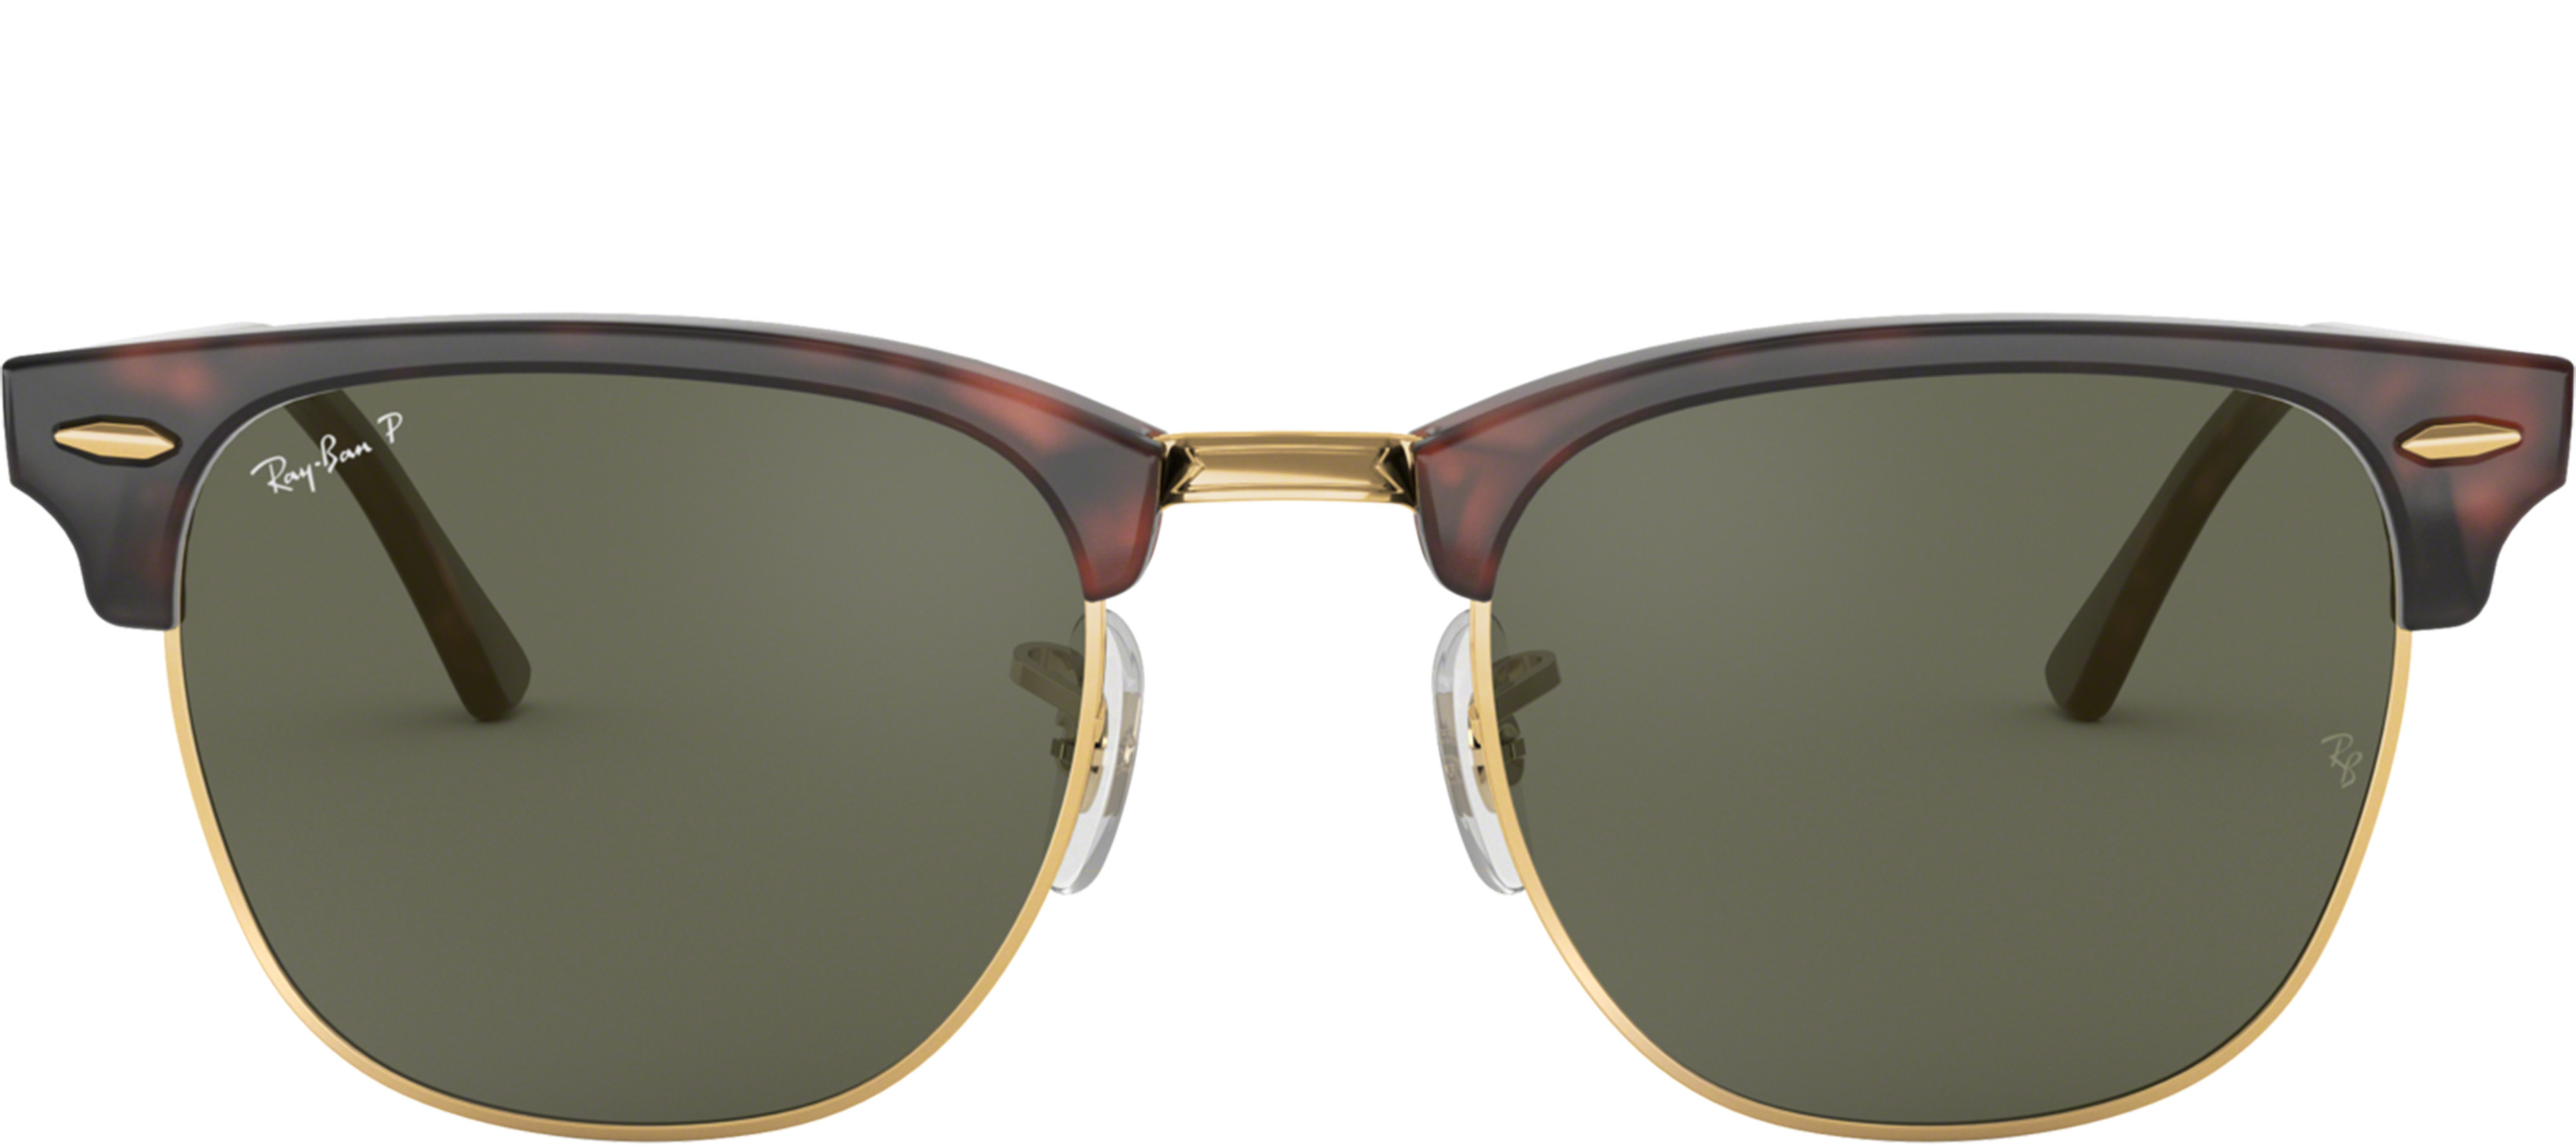 [products.image.front] Ray-Ban CLUBMASTER 0RB3016 990/58 Sonnenbrille